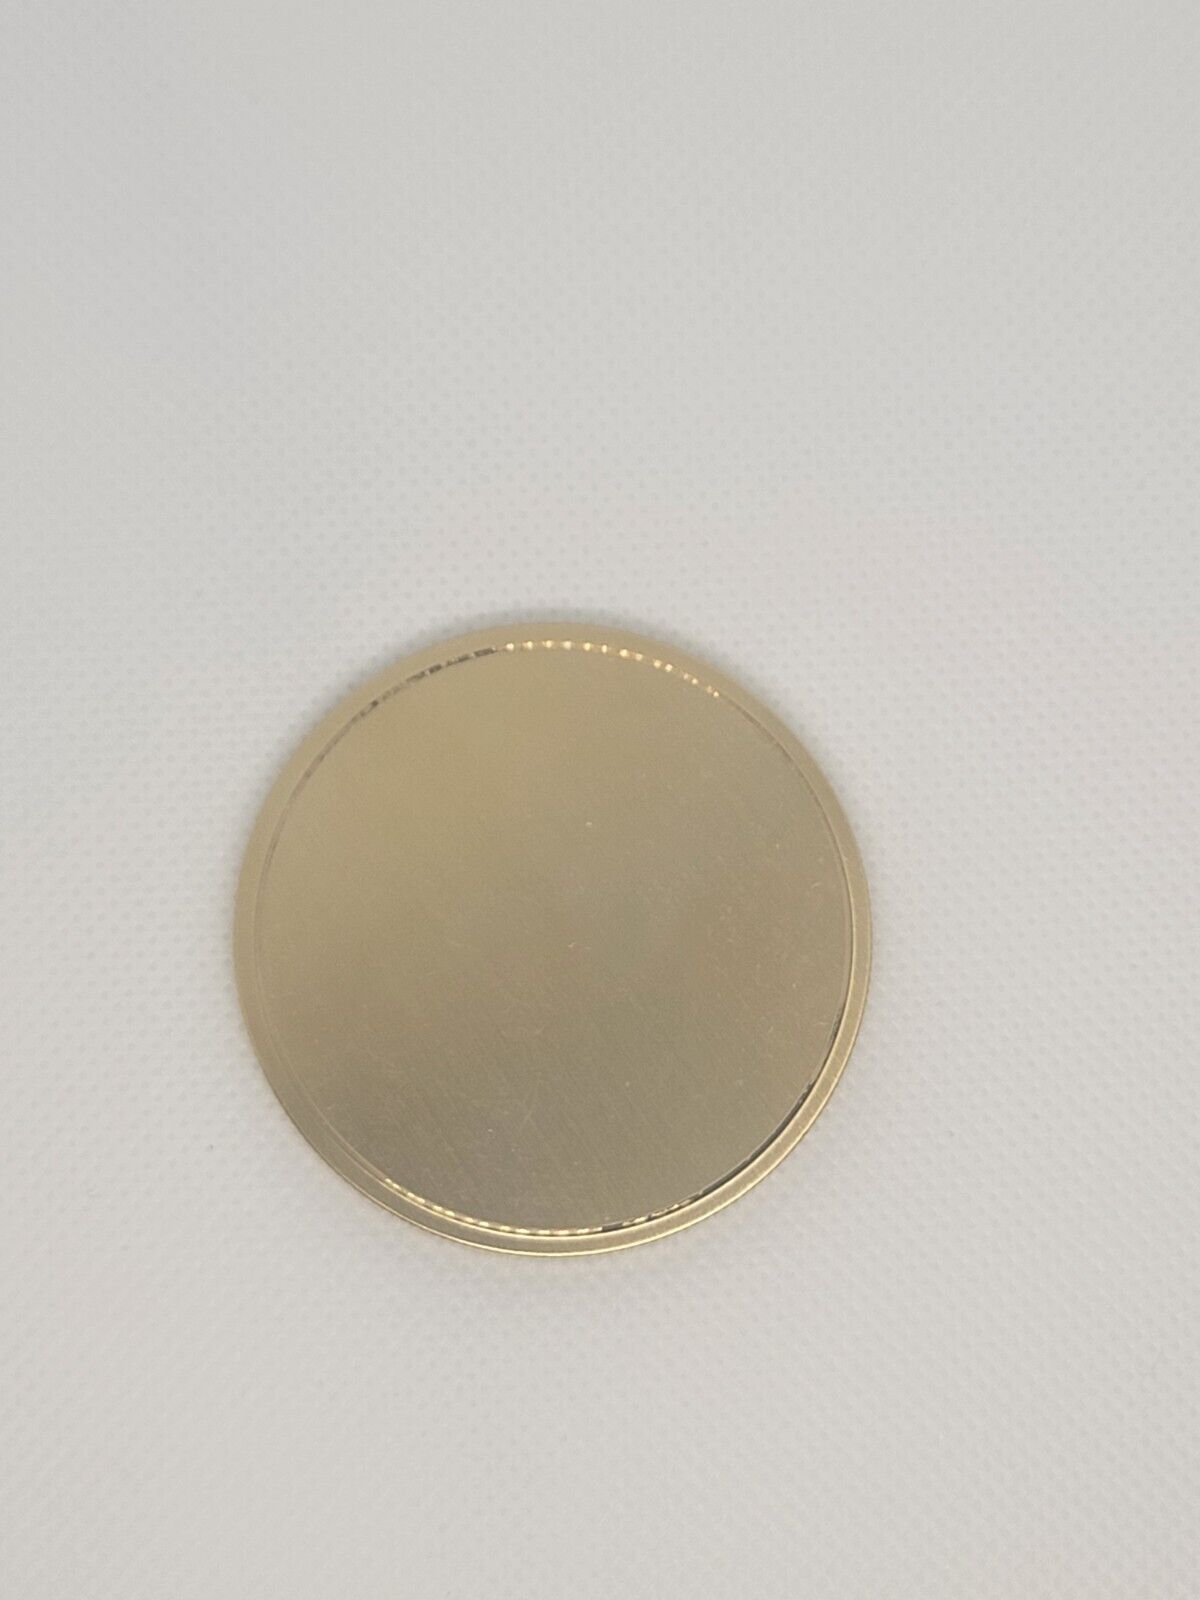 Blank Brass Challenge Coin - 50mm x 3mm  - Laser Engravable